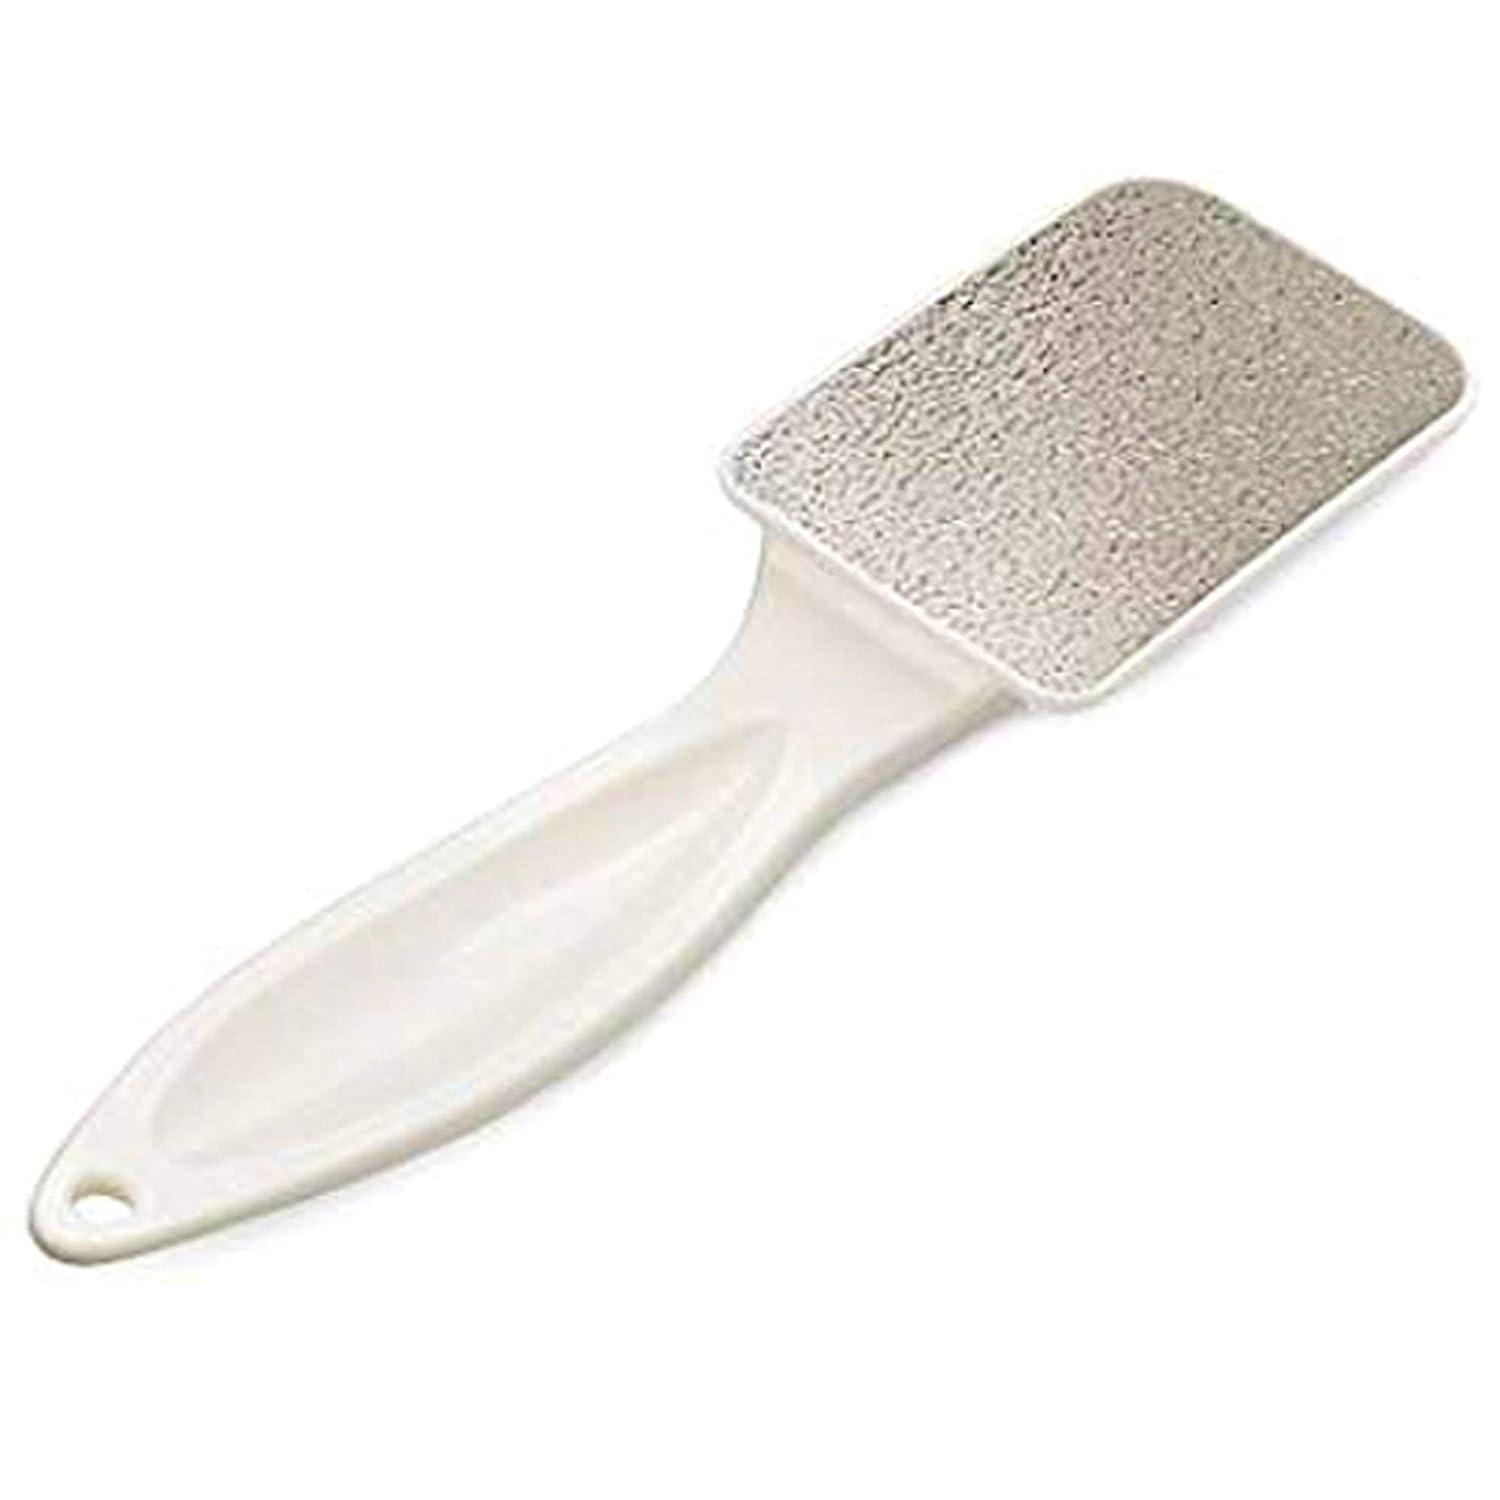 Karlash 2-Sided Nickel Foot File for Callus Trimming and Callus